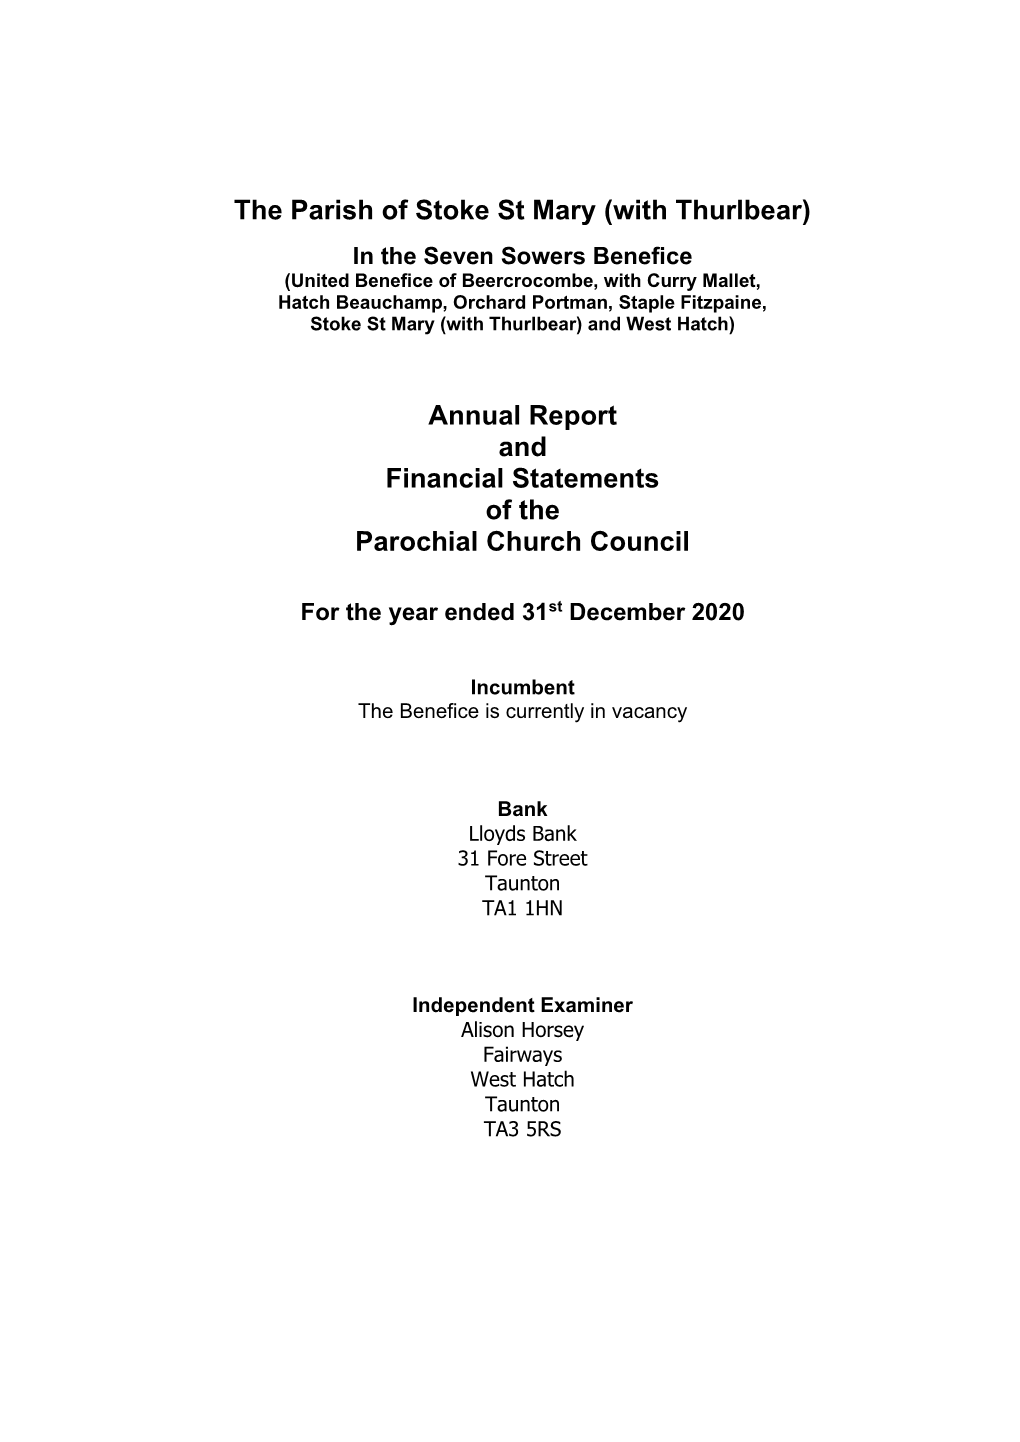 Stoke St Mary Annual Report